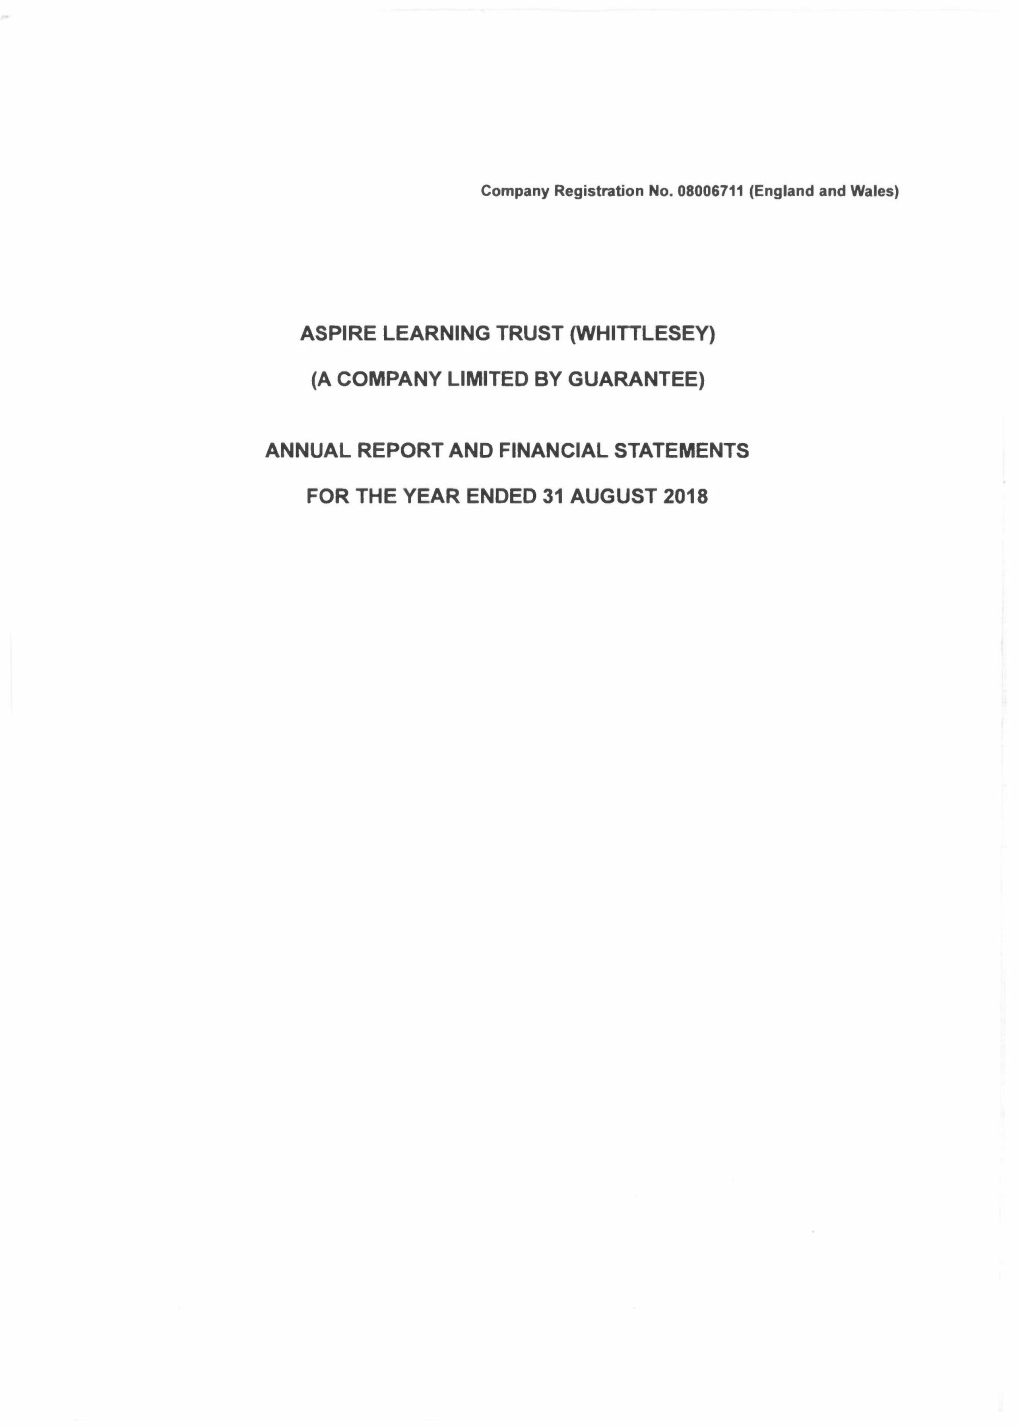 (Whittlesey) (A Company Limited by Guarantee) Annual Report And